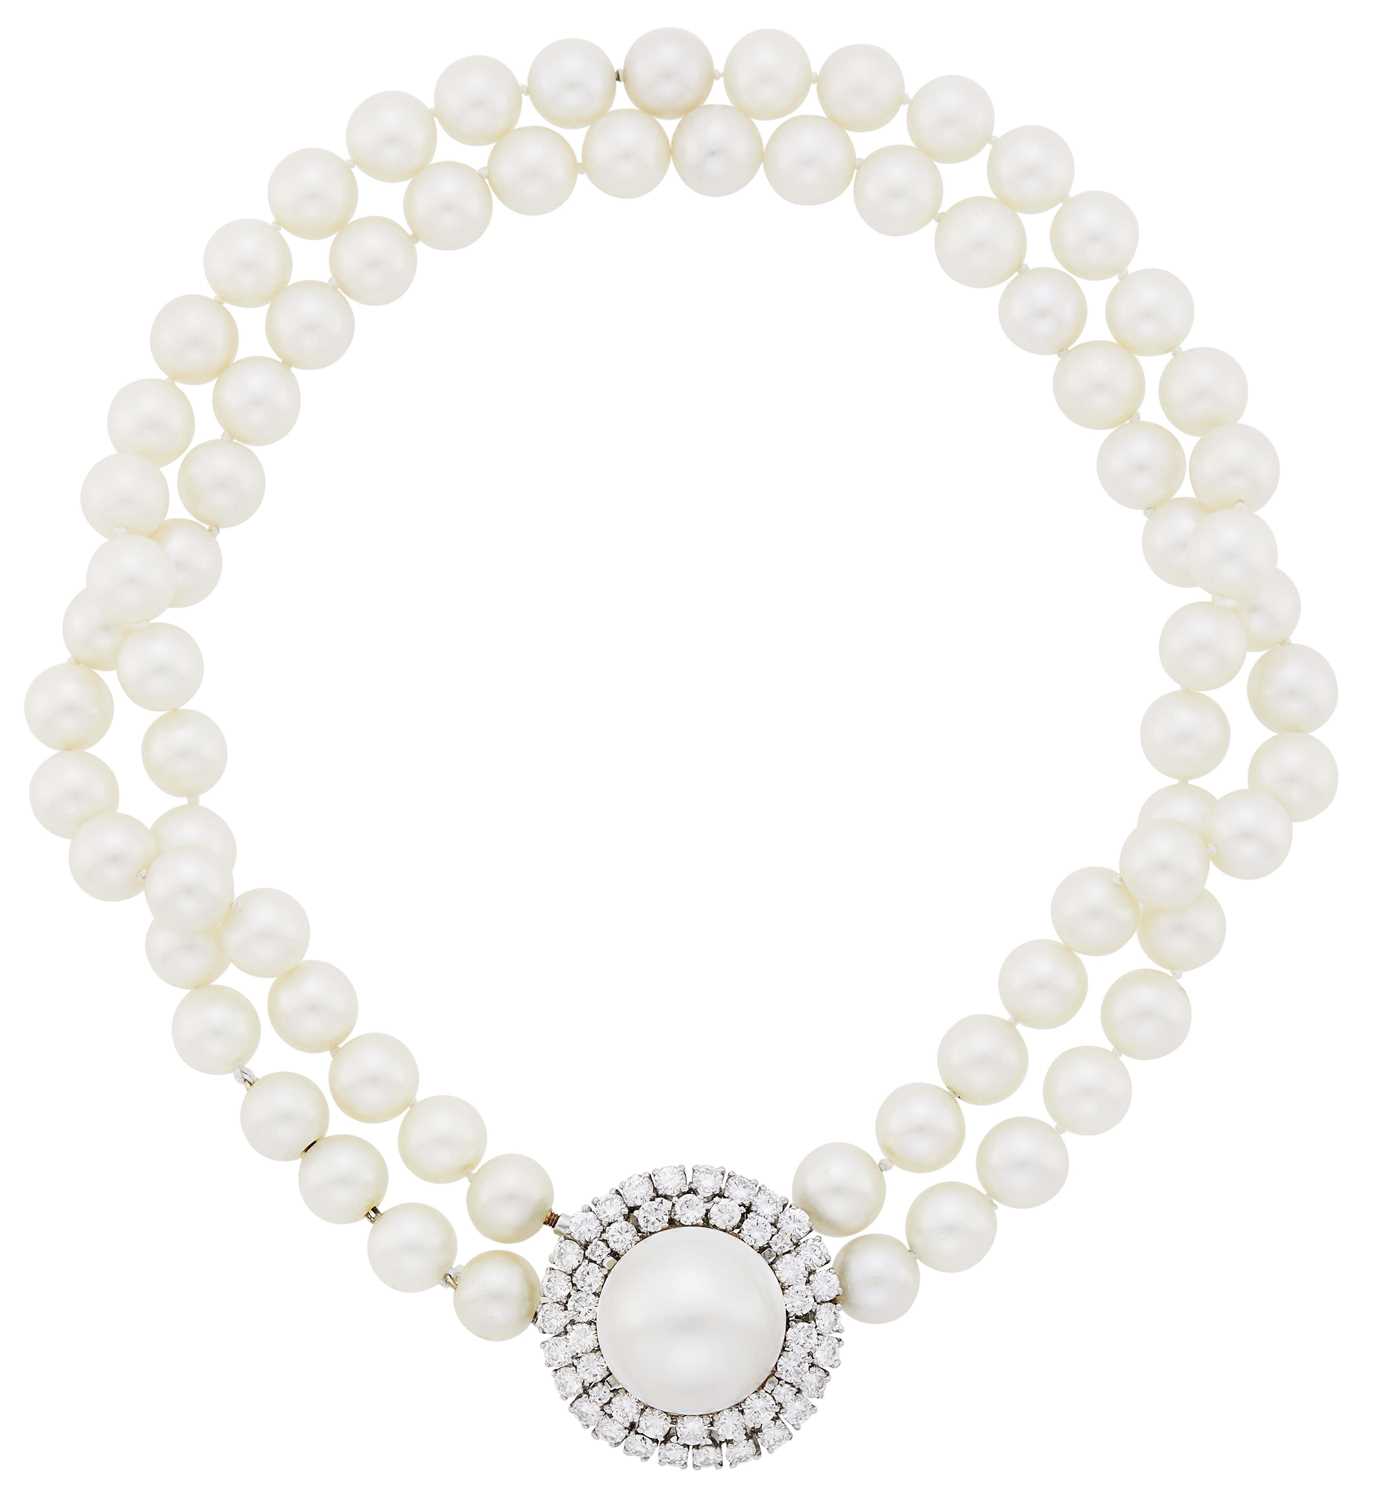 Lot 62 - Double Strand Cultured Pearl Necklace with Platinum, White Gold, Mabé Pearl and Diamond Clip-Brooch Enhancer